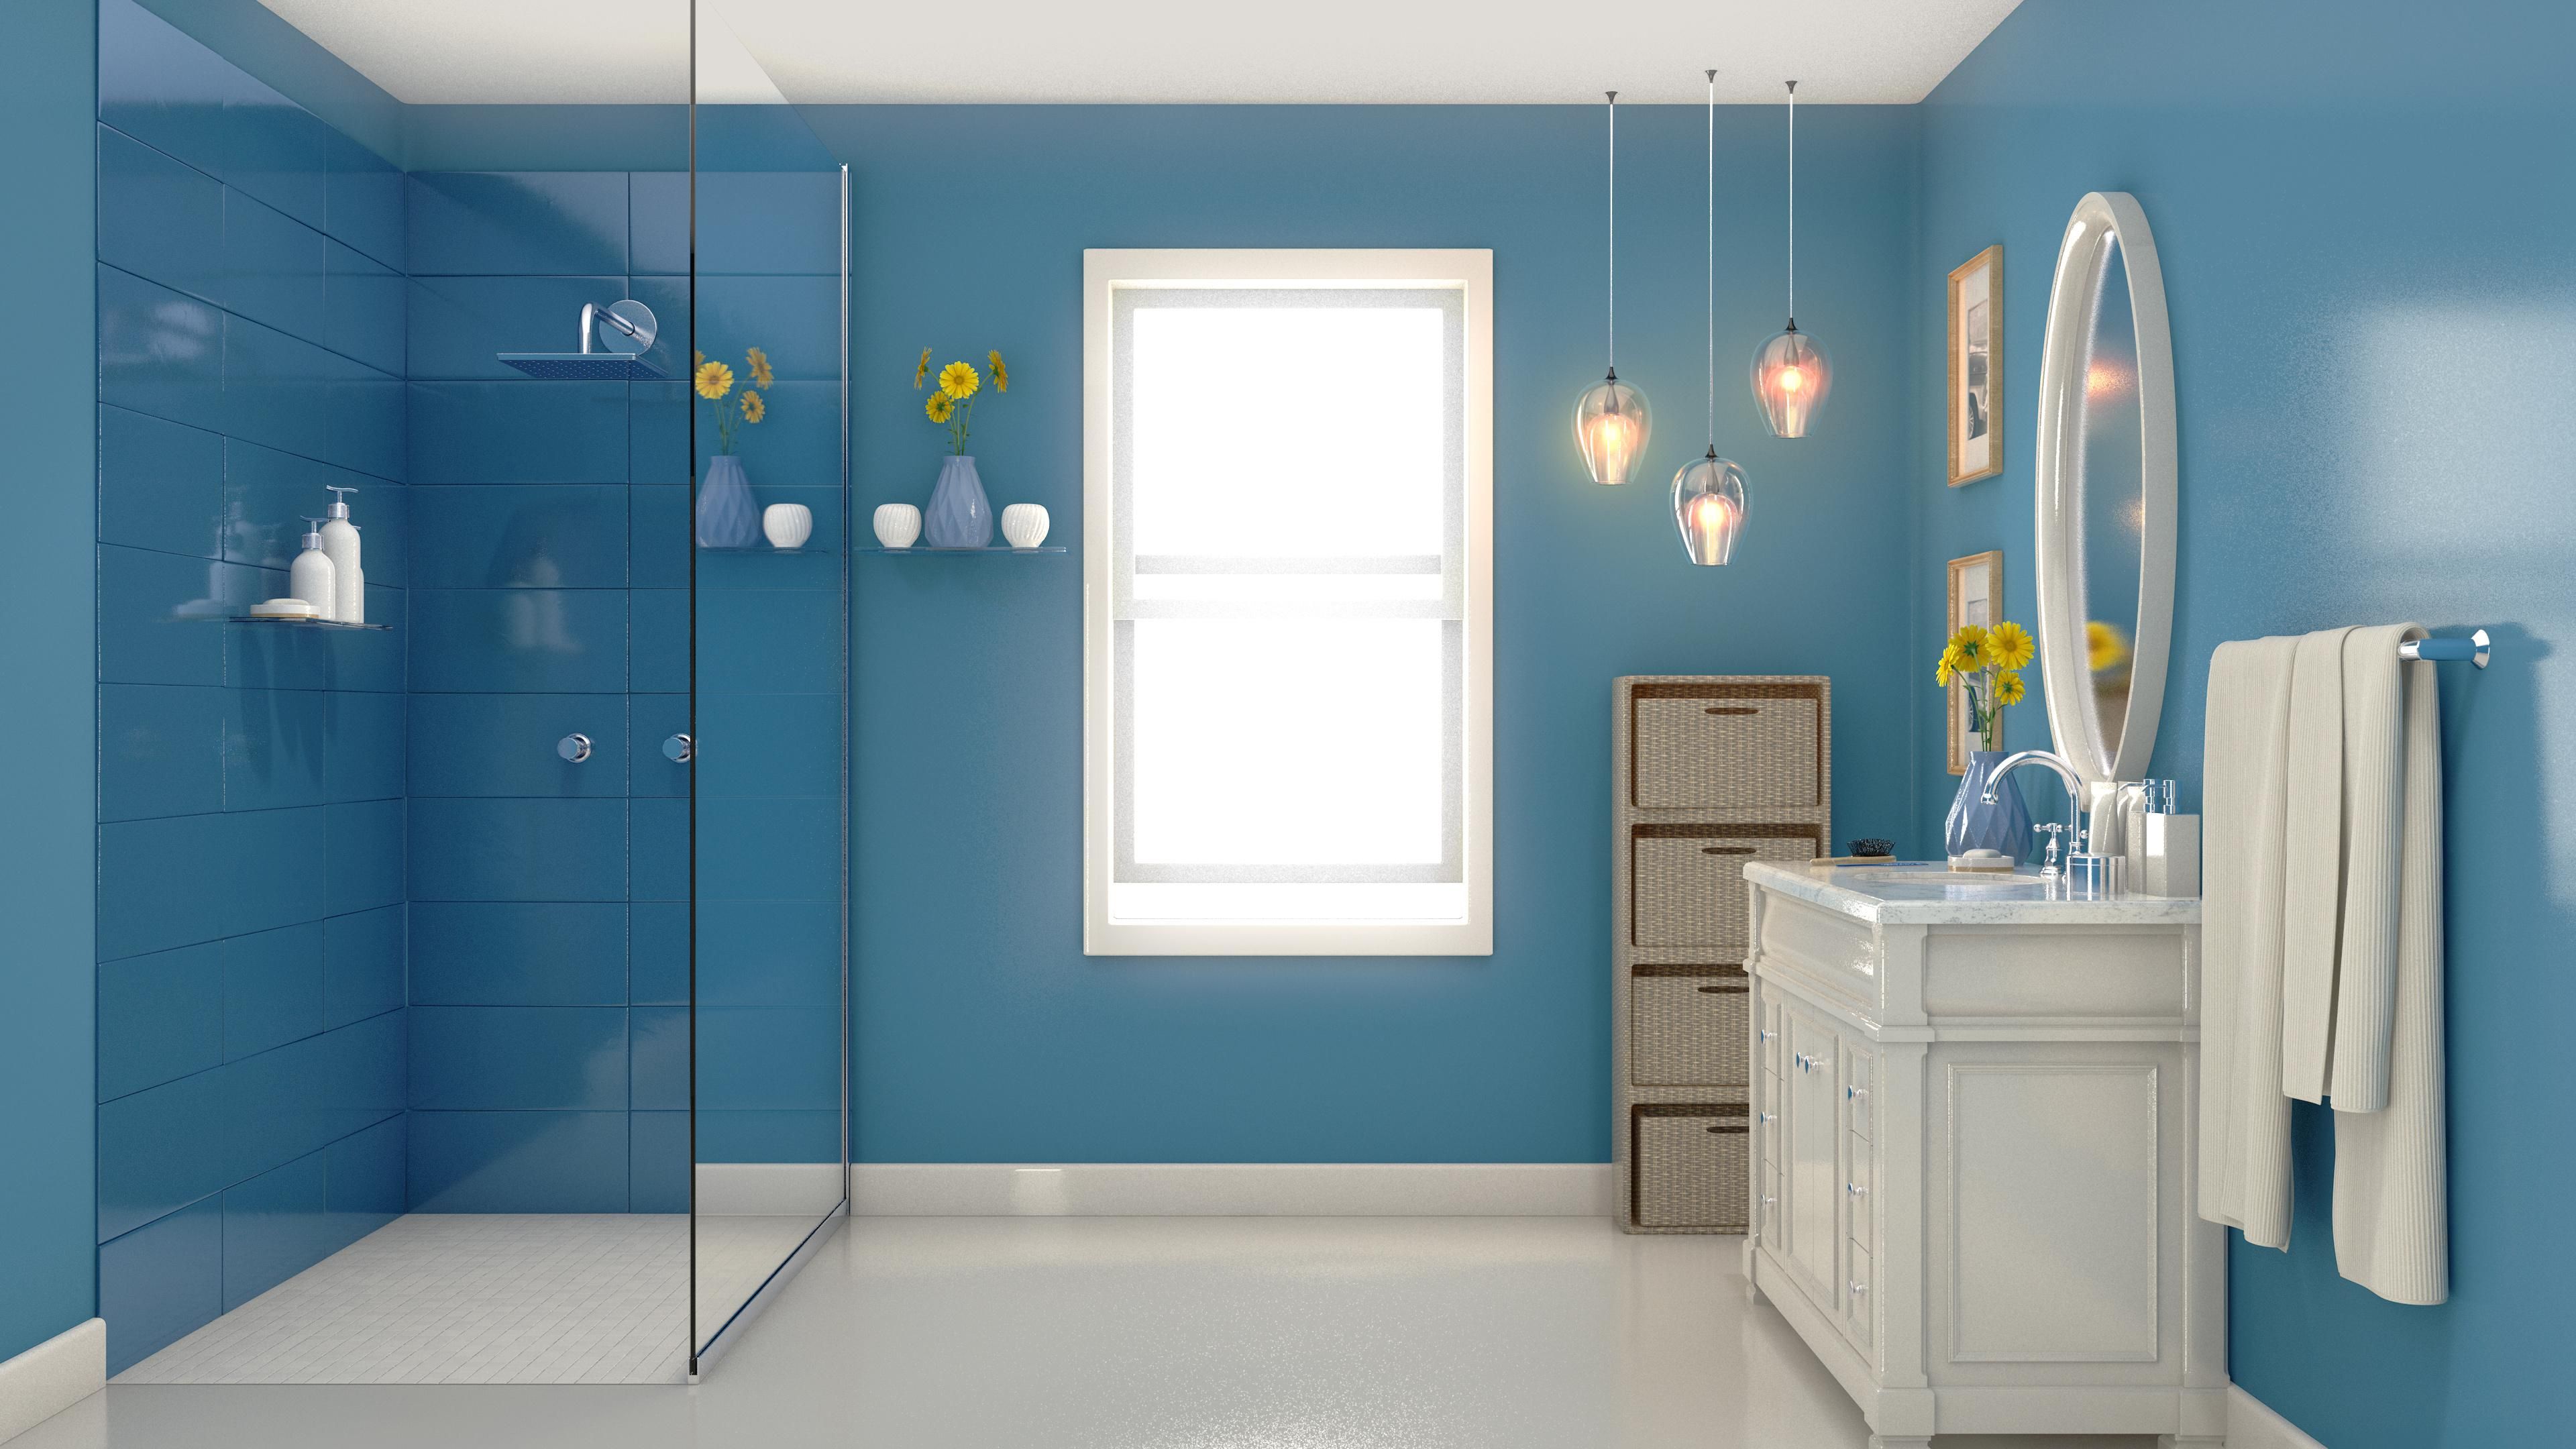 Ideas for How to Spruce Up Your Bathroom